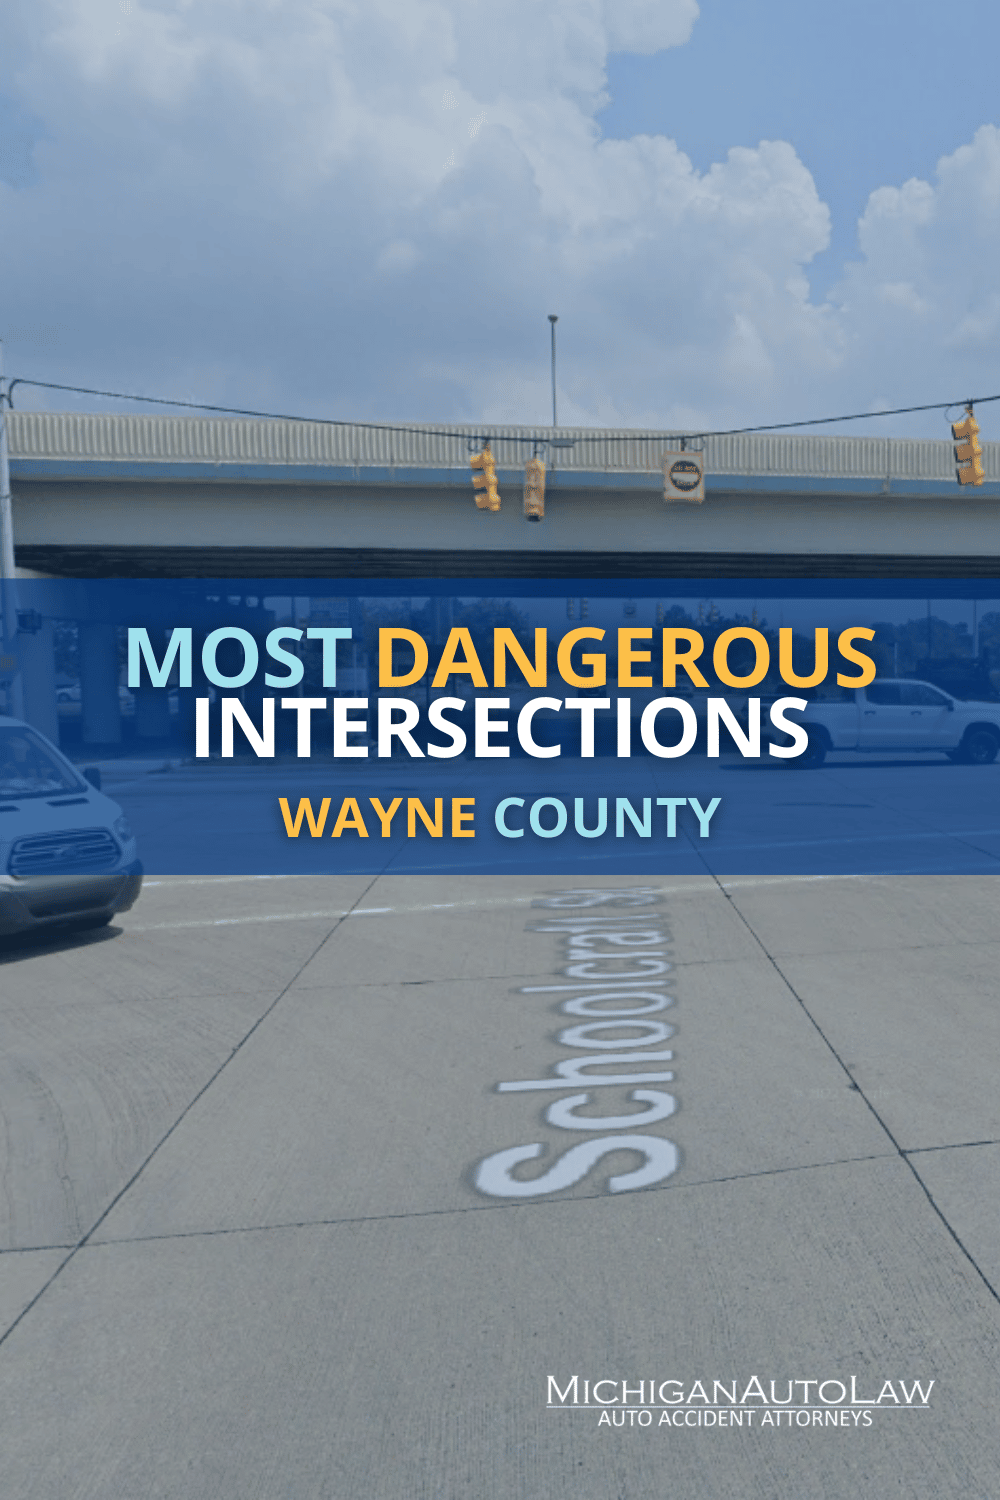 Wayne County’s Most Dangerous Intersections in 2021